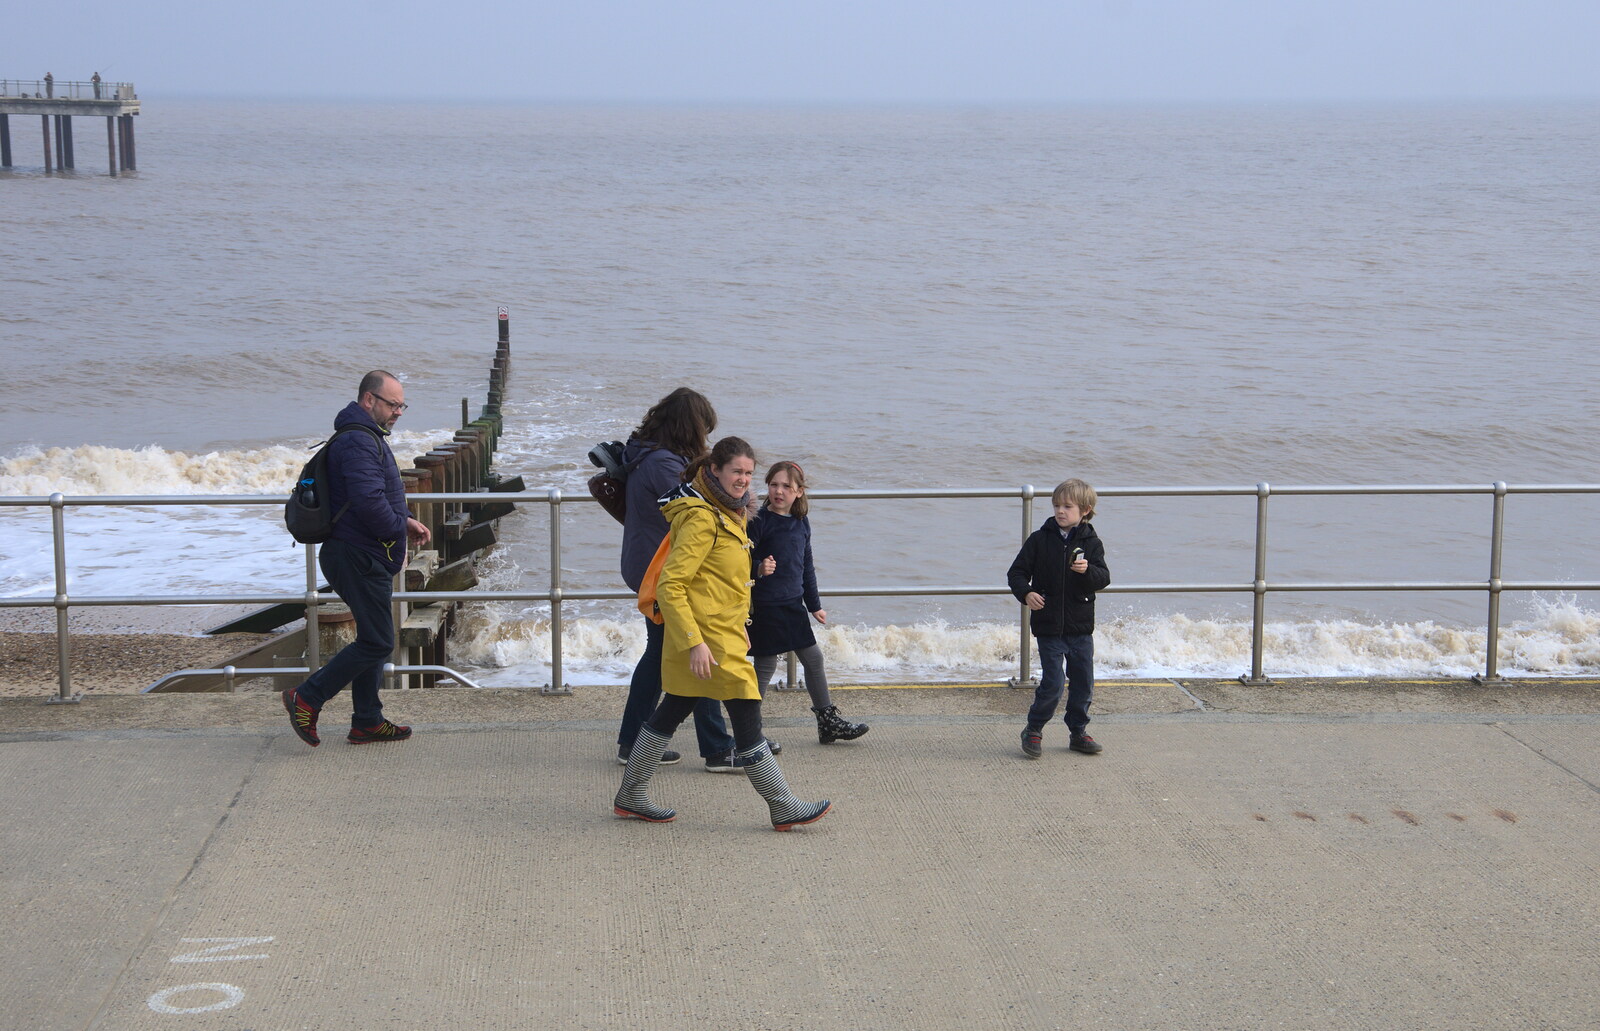 Walking along the promenade at Southwold from On The Beach, Southwold, Suffolk - 7th April 2019